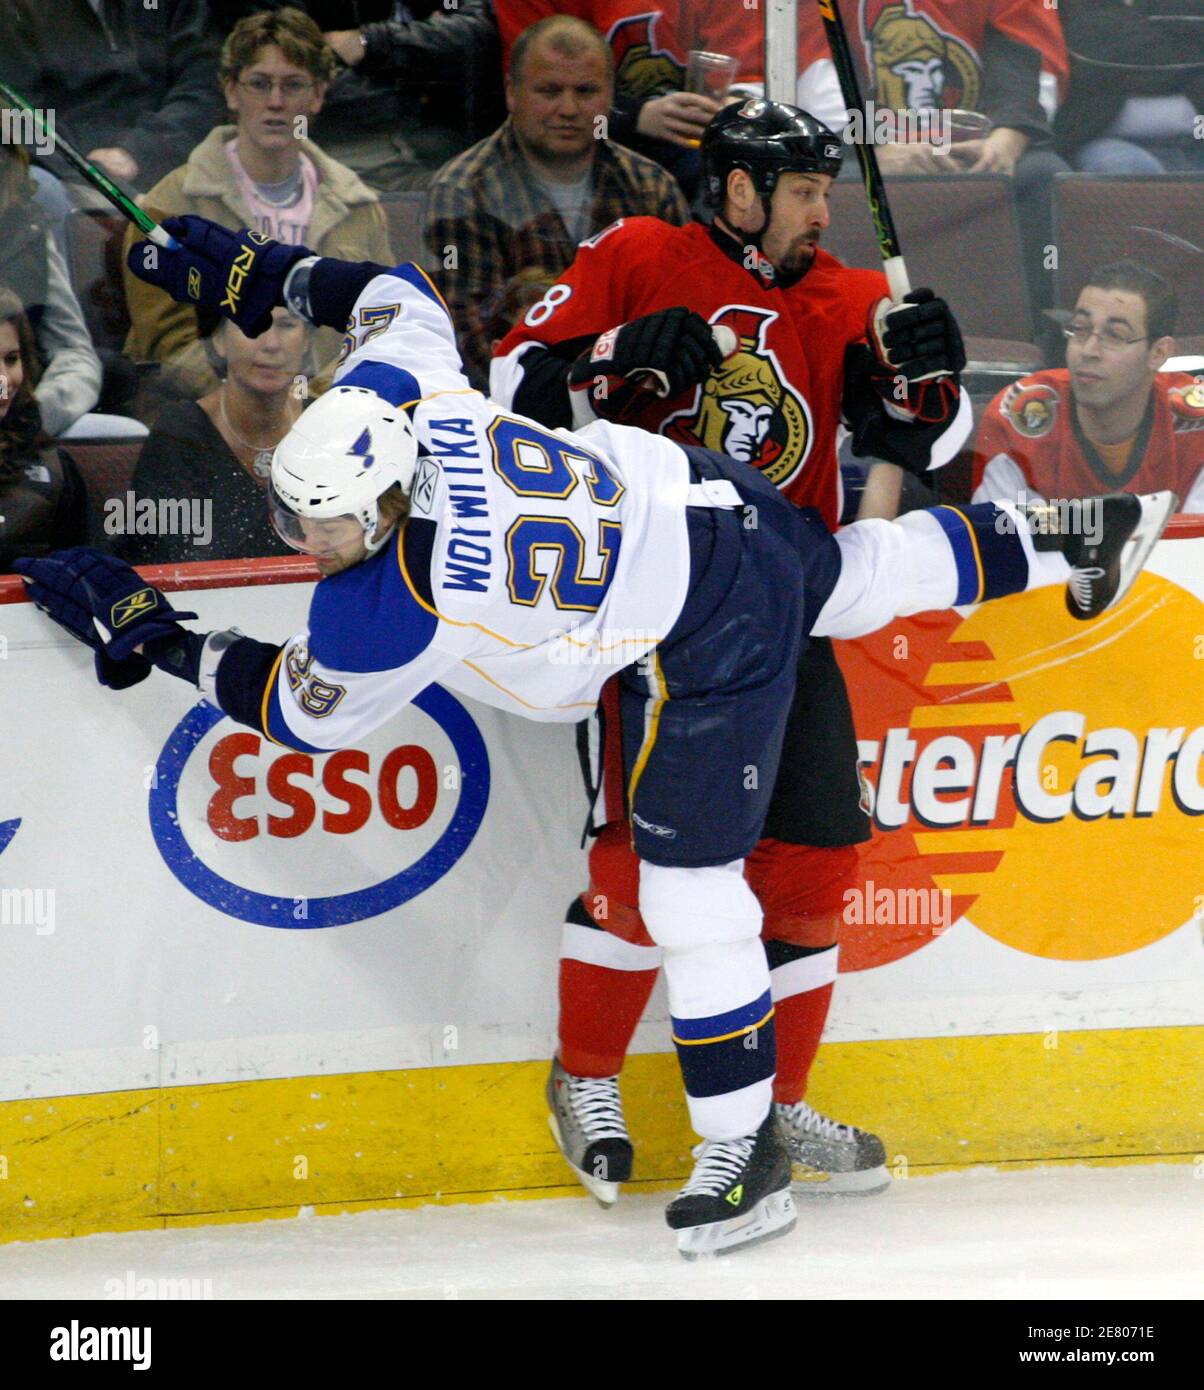 St. Louis Blues Jeff Woywitka (L) collides with Ottawa Senators Martin Lapointe during the first period of their NHL hockey game in Ottawa March 20, 2008.       REUTERS/Chris Wattie       (CANADA) Stock Photo